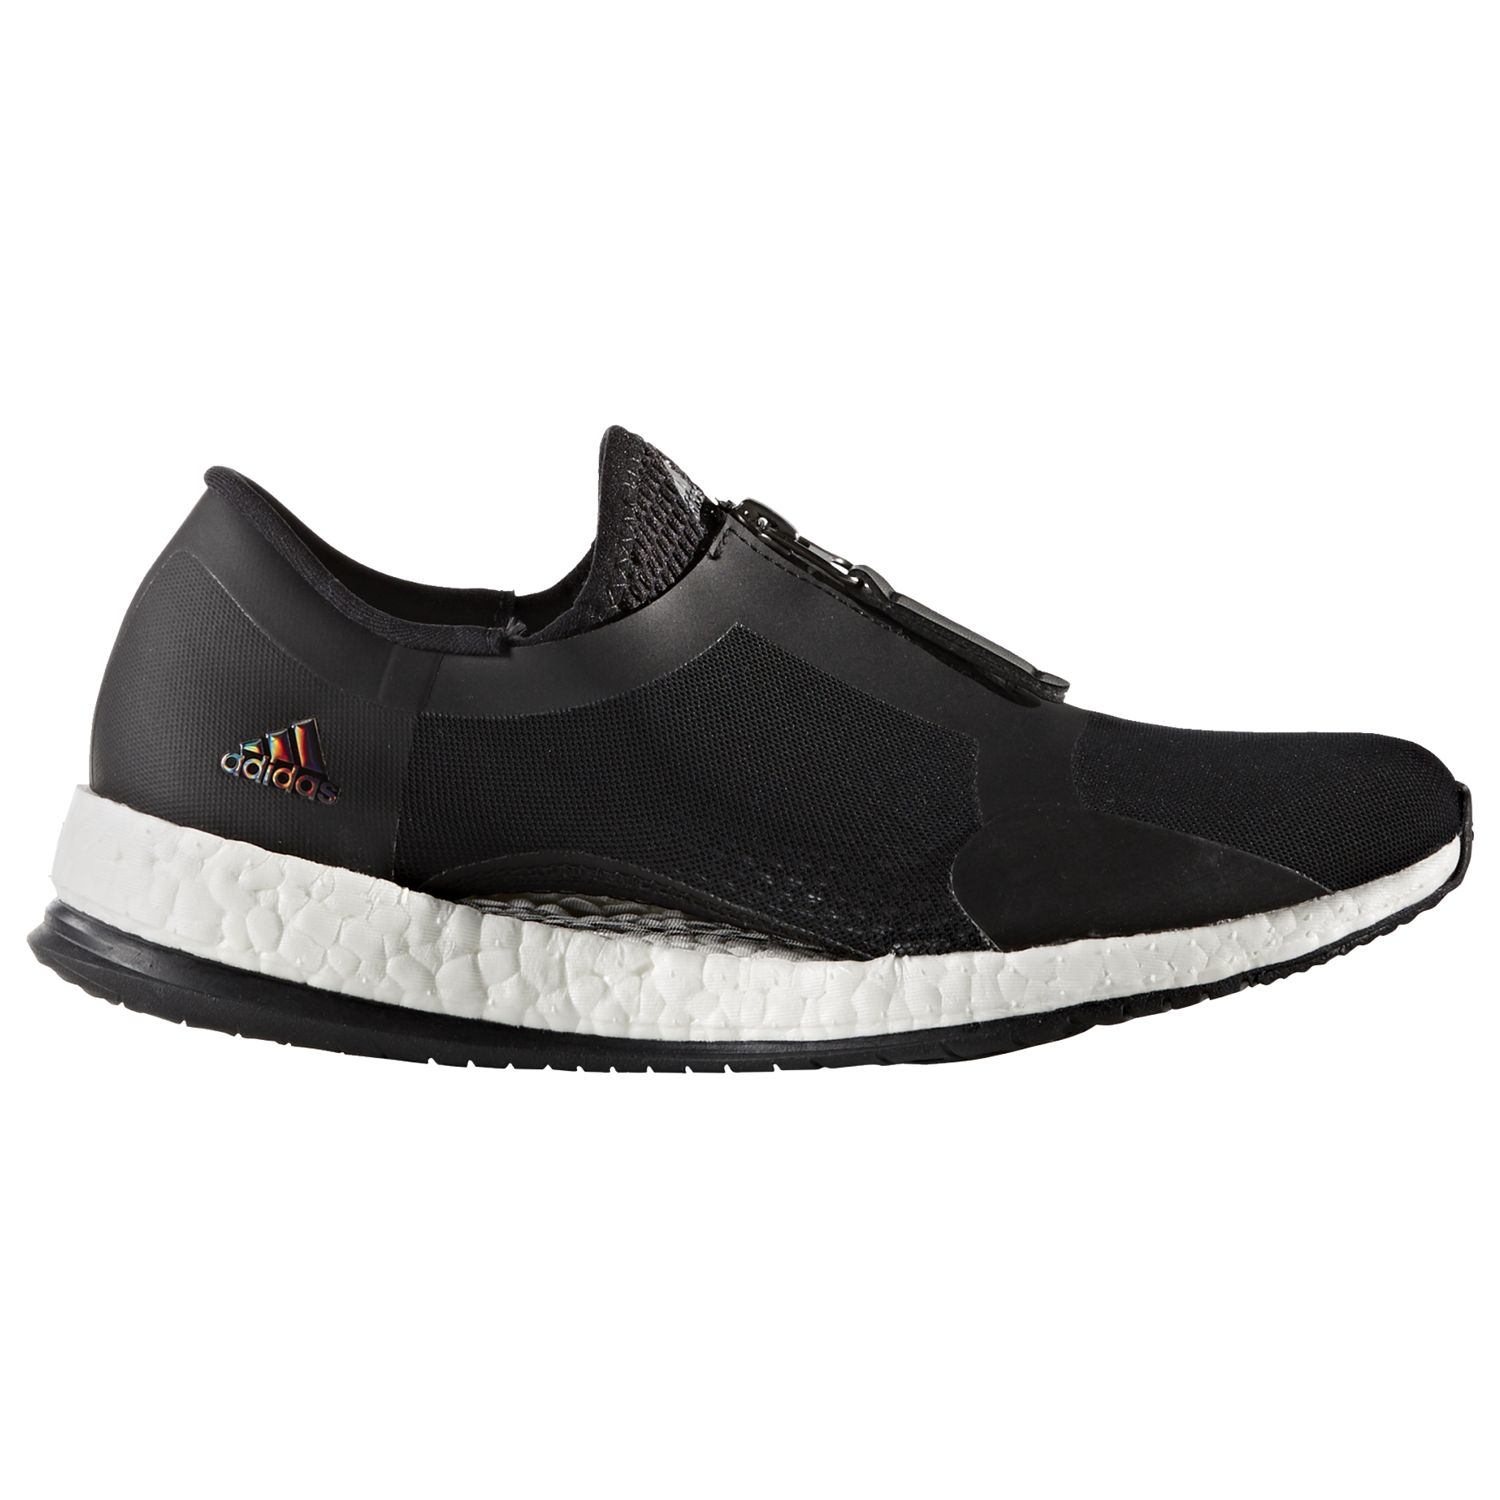 adidas pure boost cross trainer